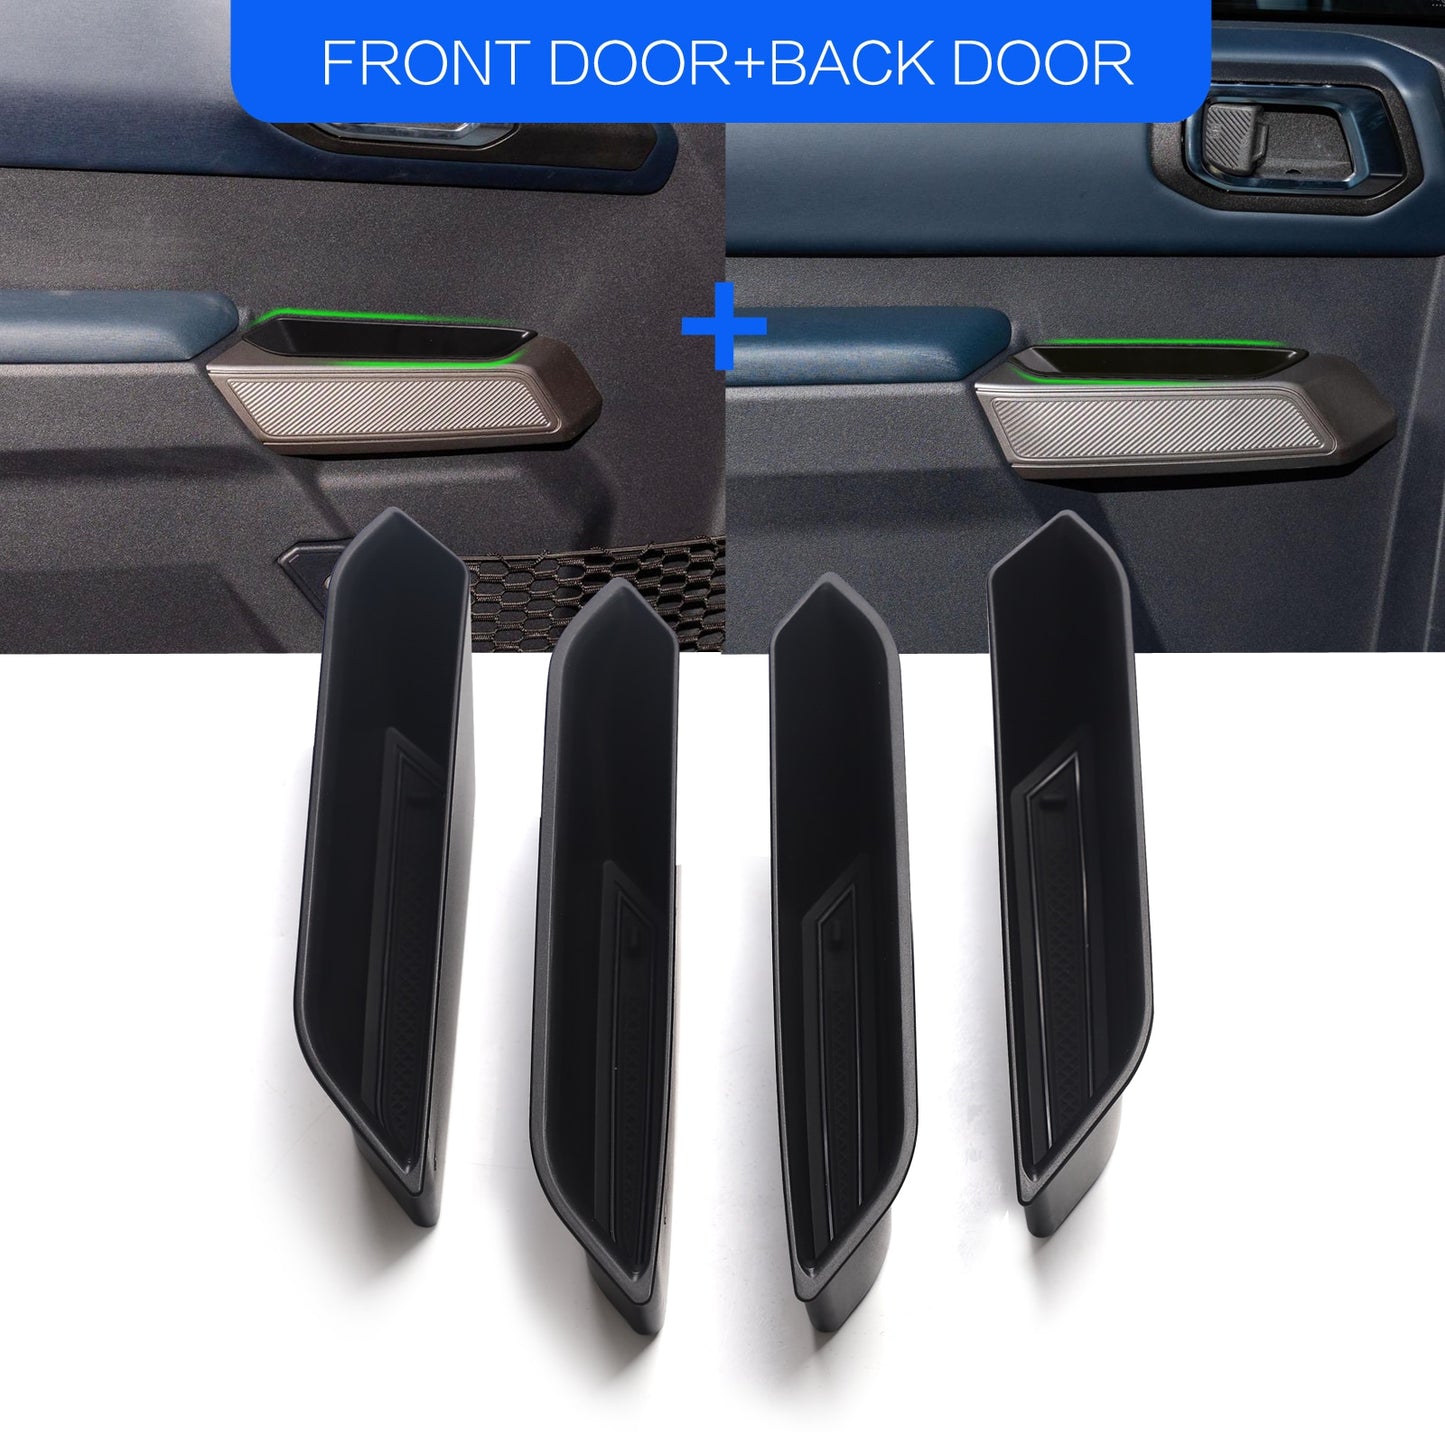 Front Rear Door Handle Storage Box for Ford Bronco 2021 2022 (4 Door) Accessories Car Side Armrest Organizer Container Tray 4pcs